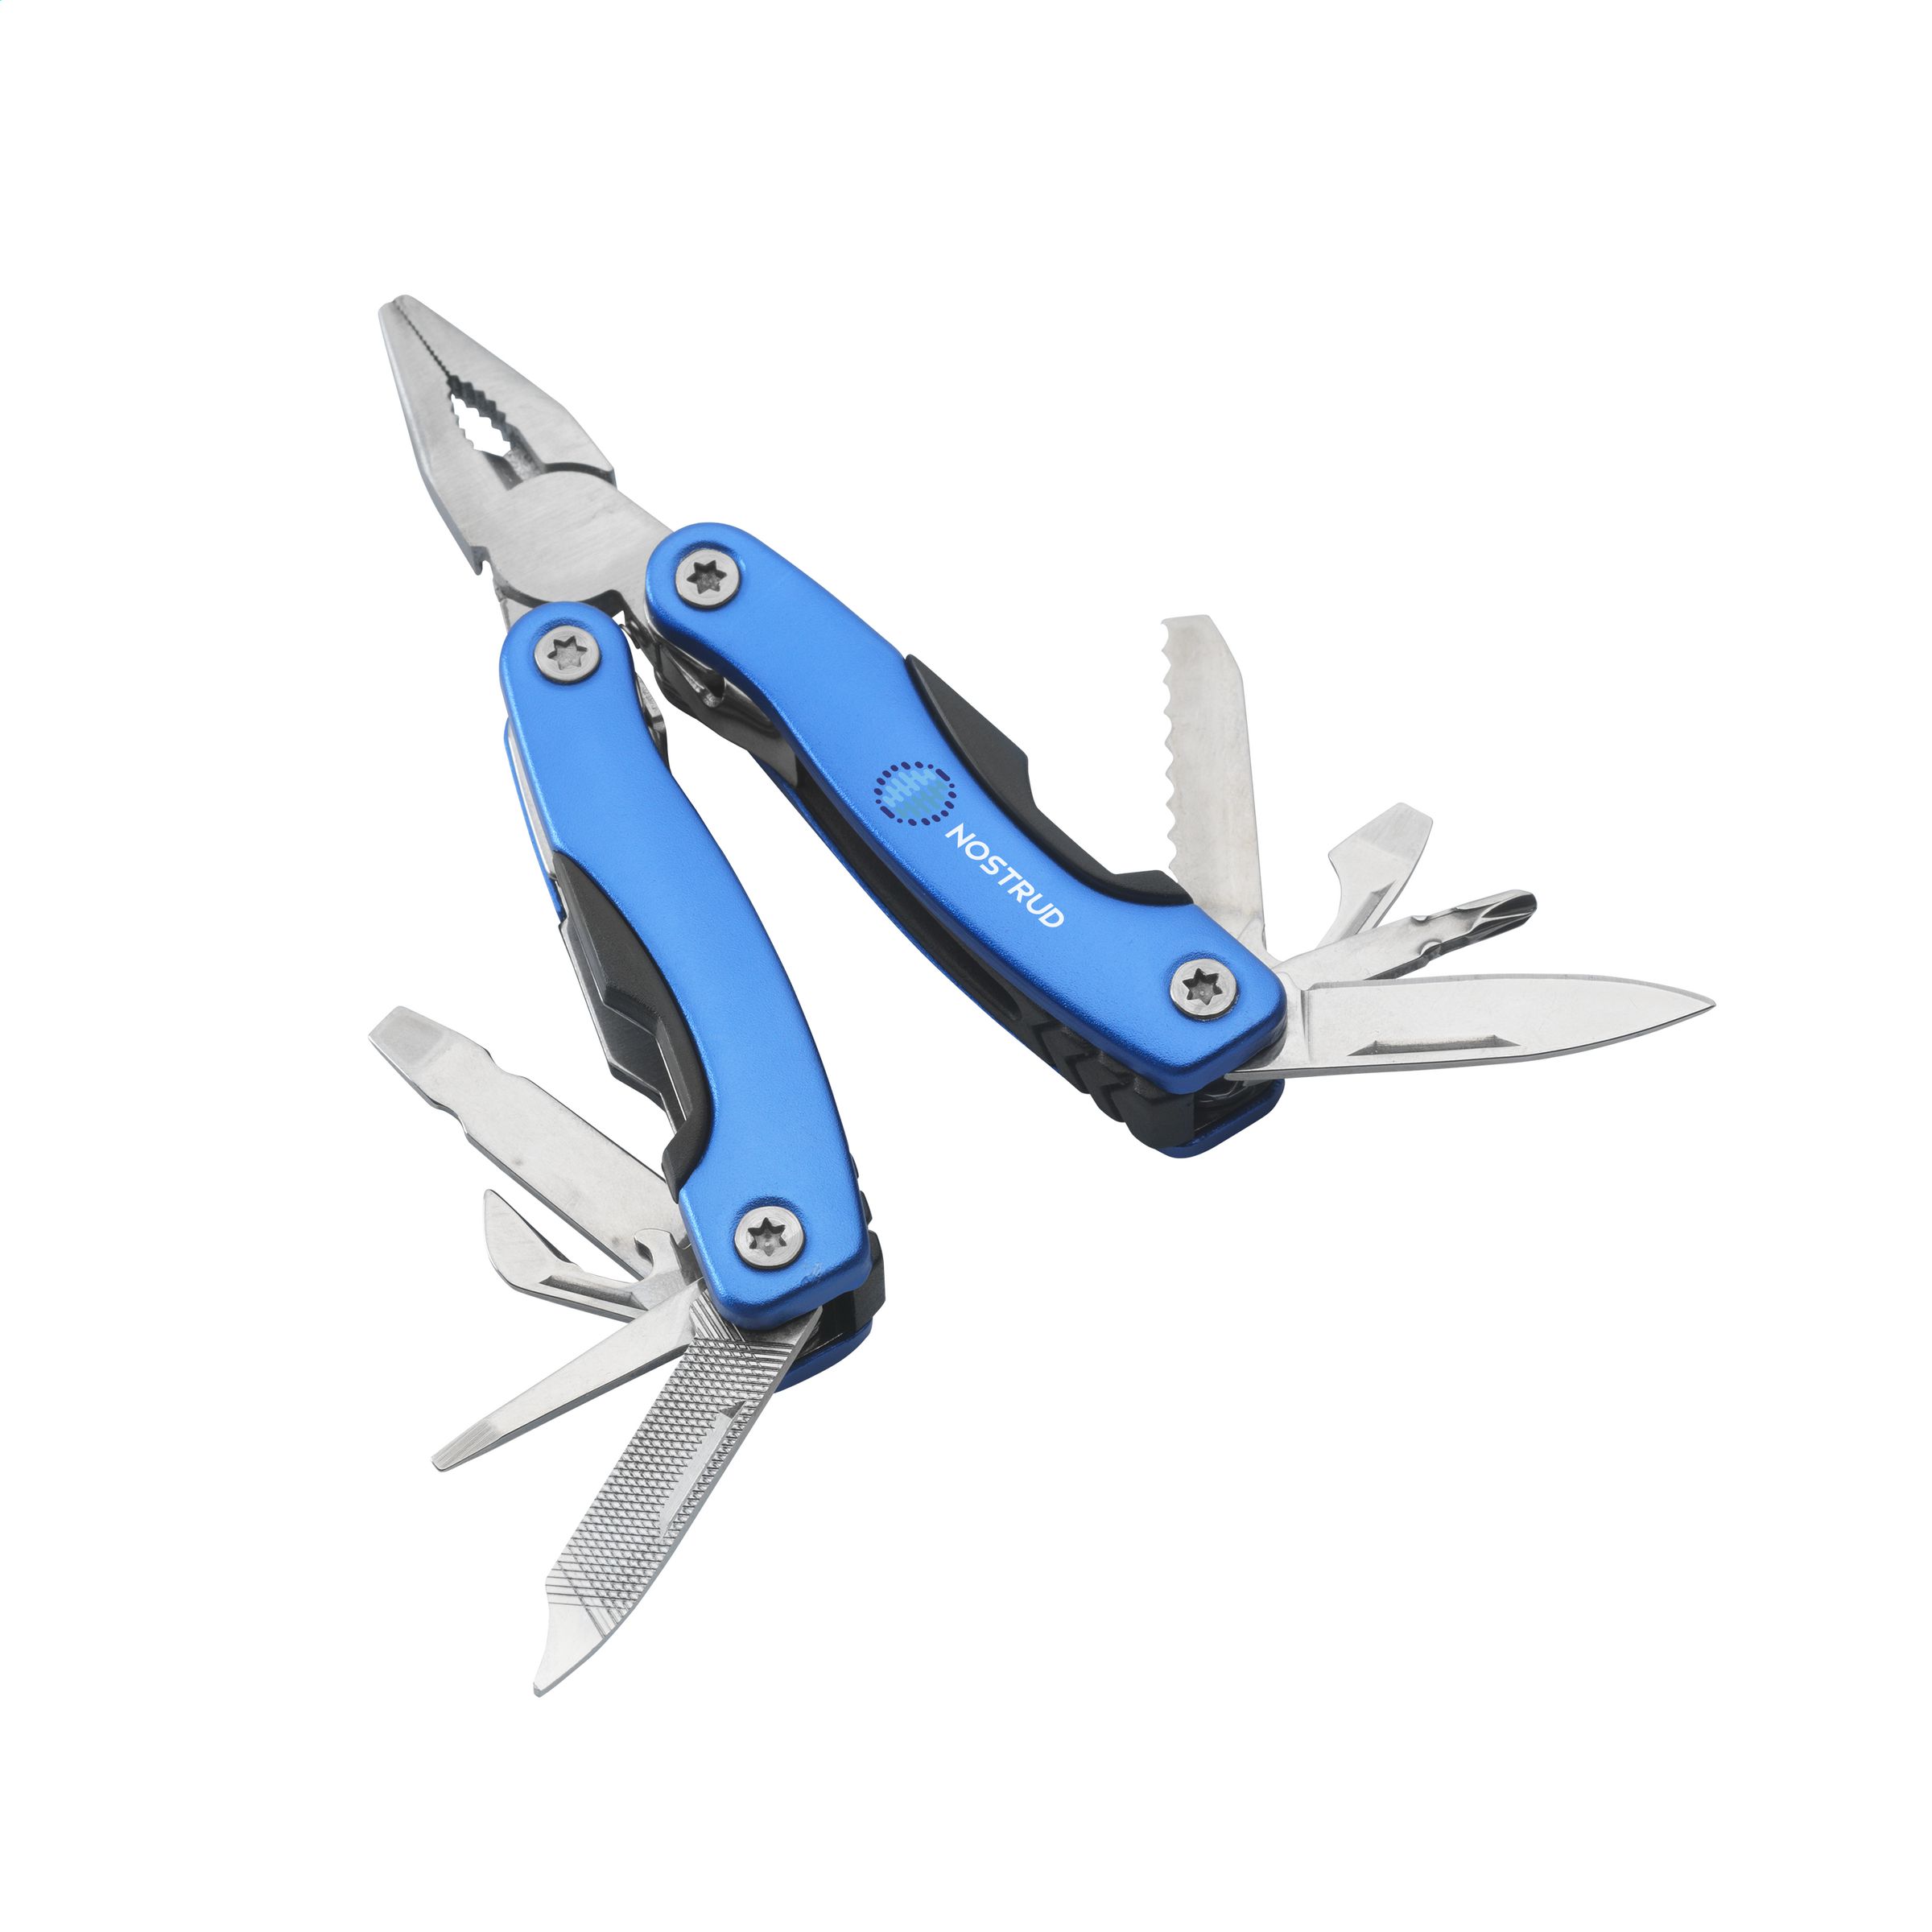 Compact stainless steel multi-tool with an aluminum handle - Curzon Park